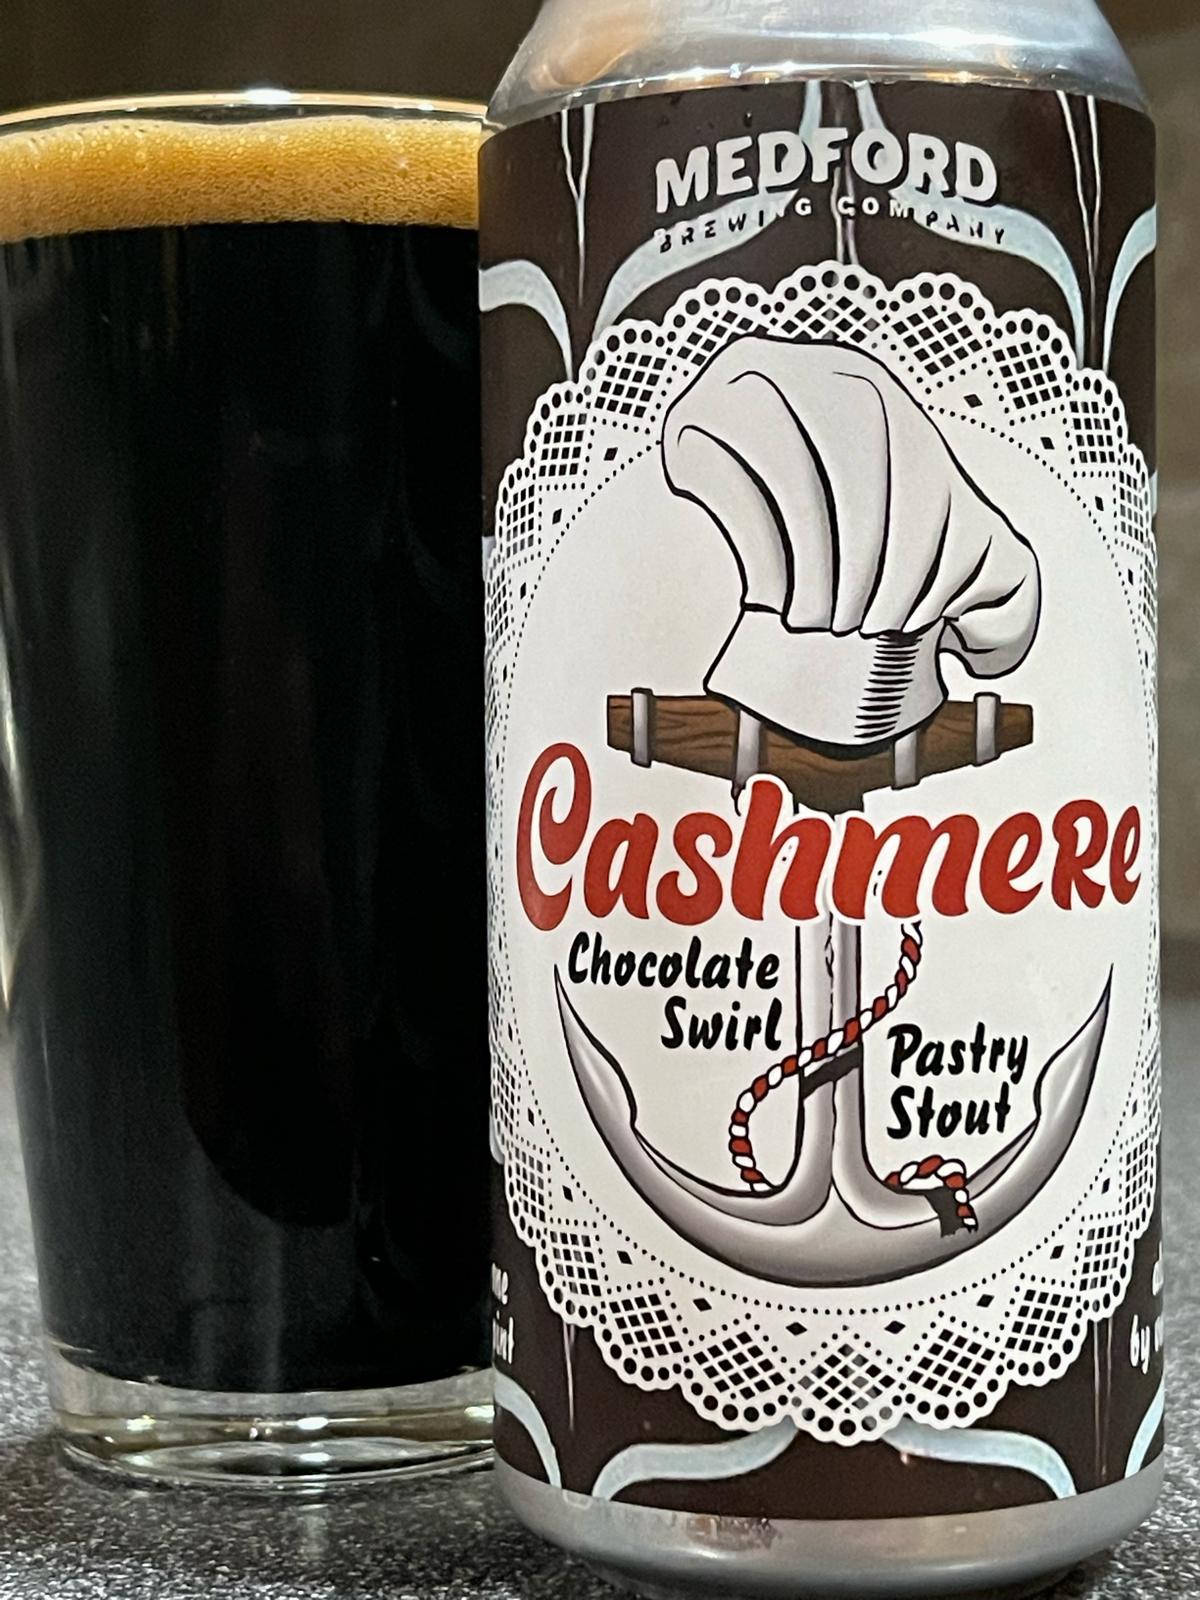 Cashmere Chocolate Swirl Pastry Stout